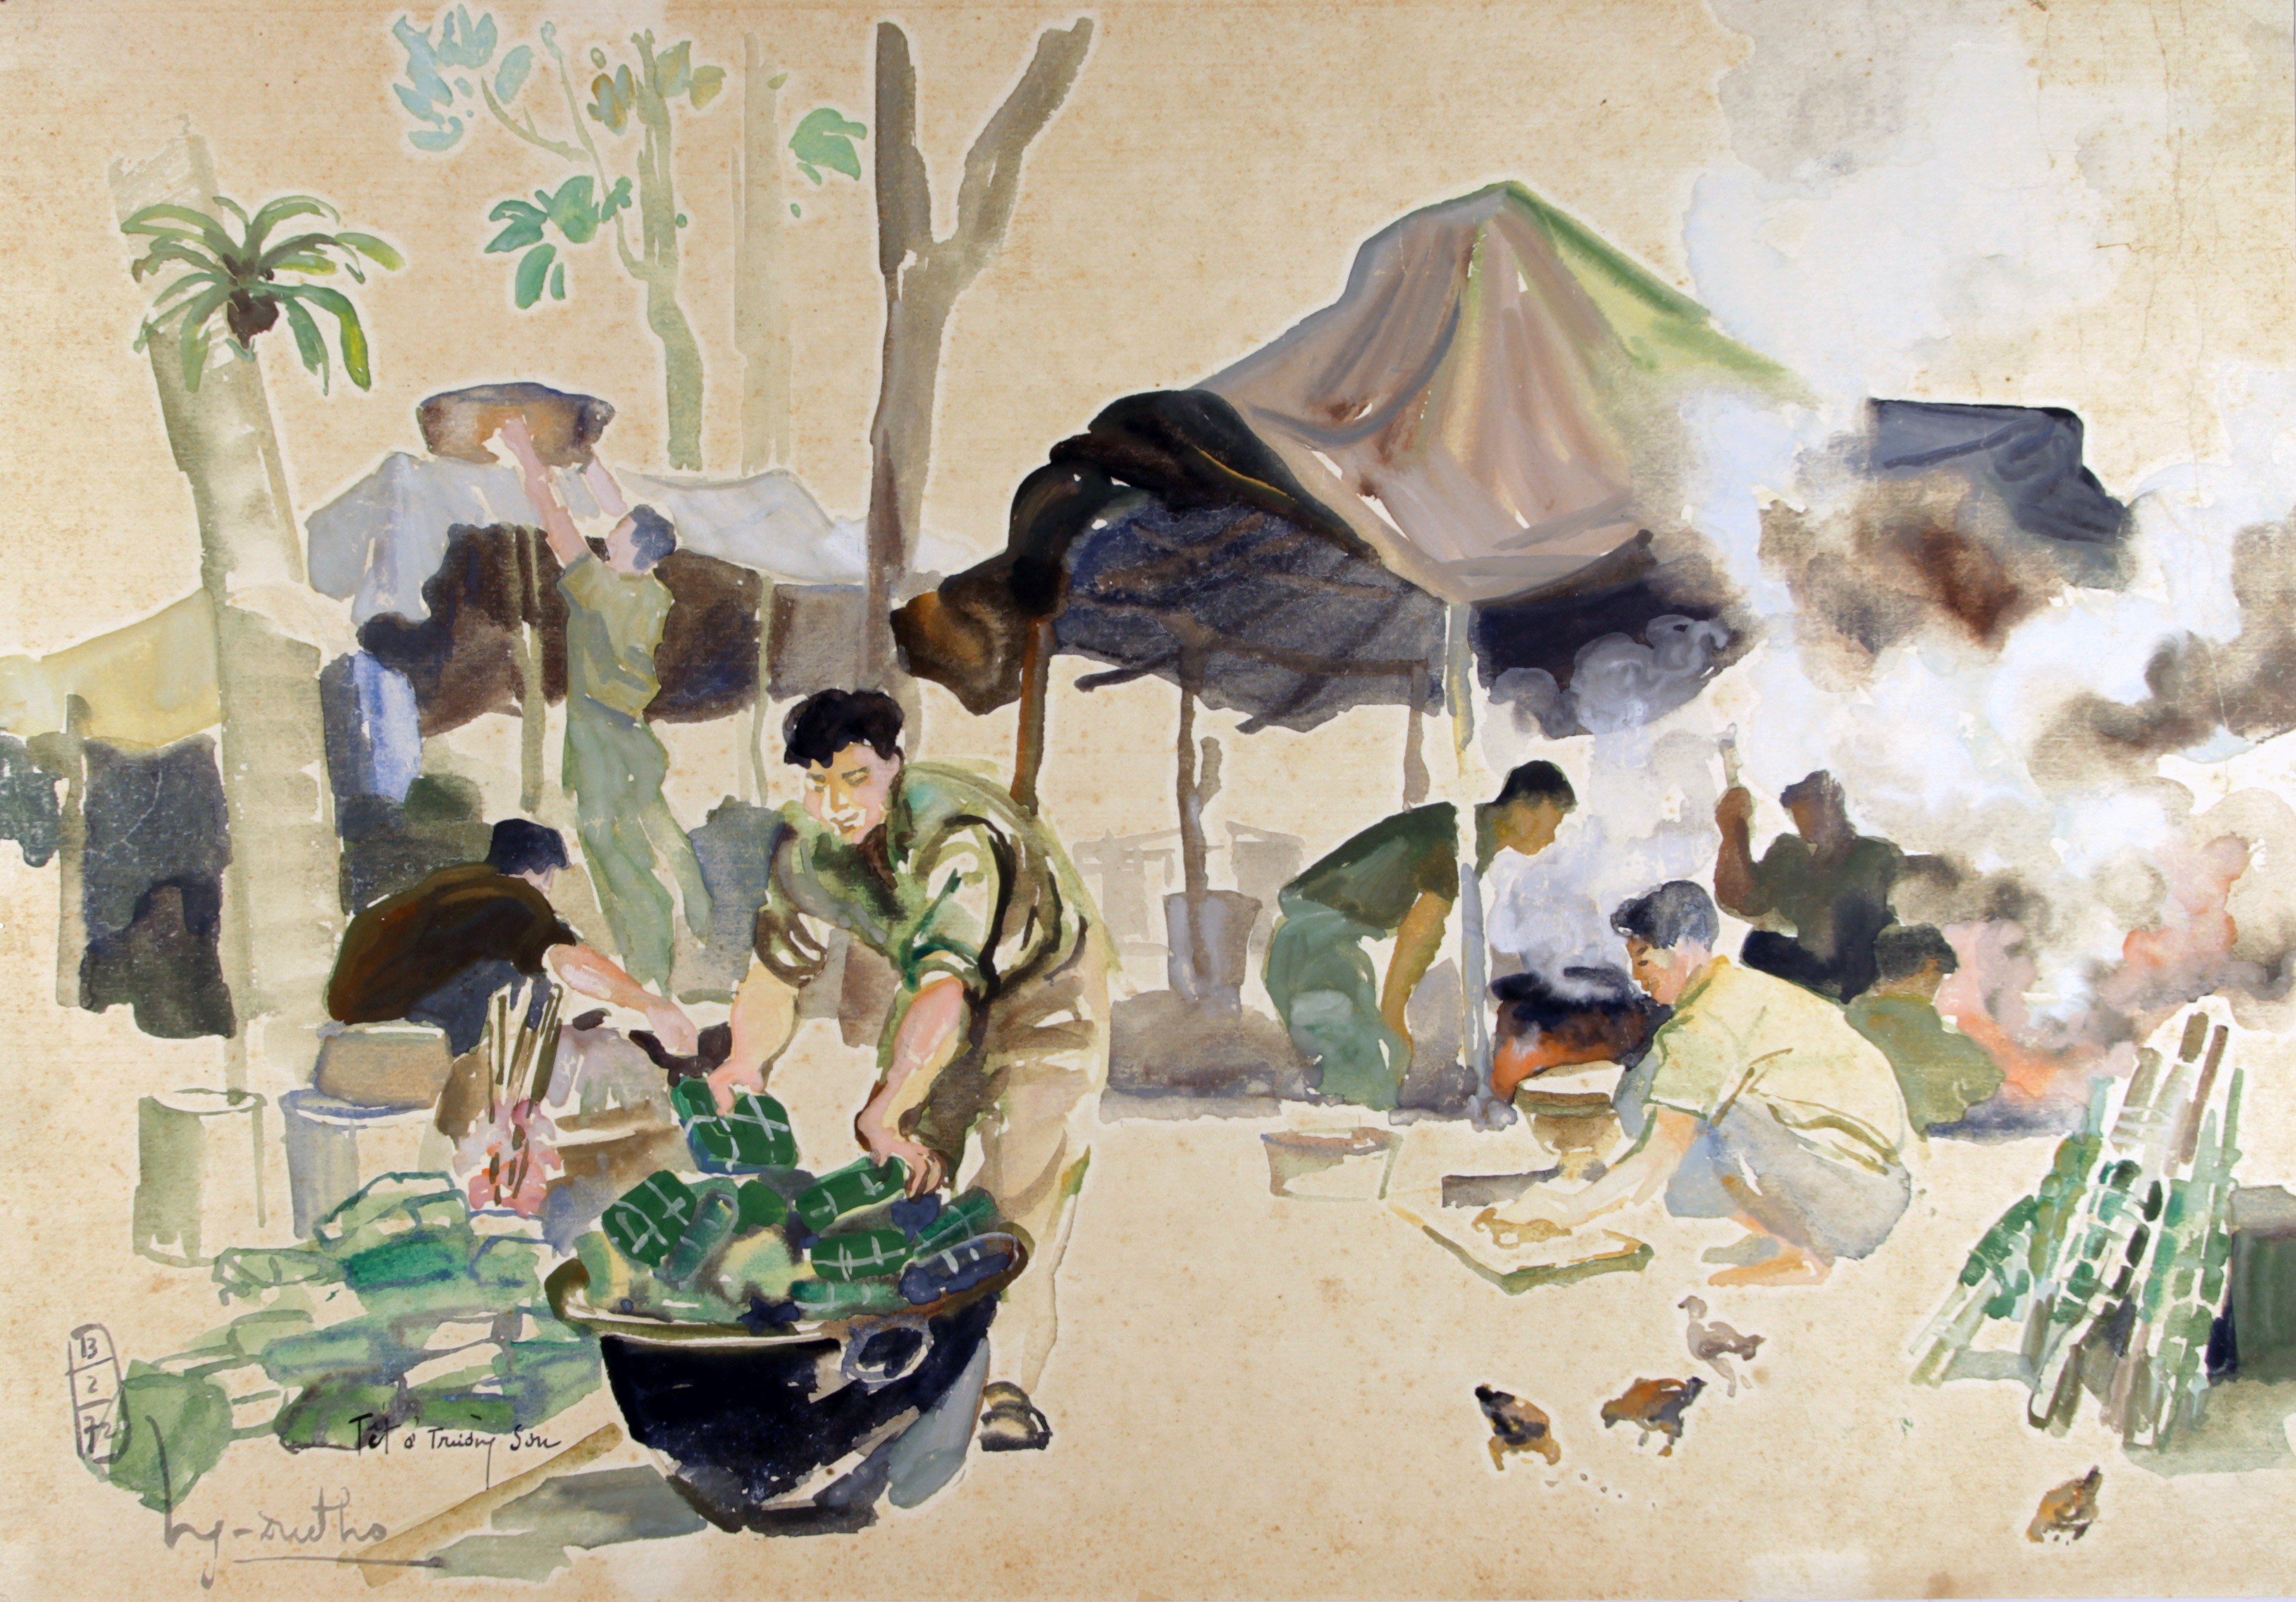 A dance troop performs in the middle of the Vietnamese jungle in war artist Bui Quang Anh’s 1971 painting. Image: Witness Collection / Bui Quang Anh